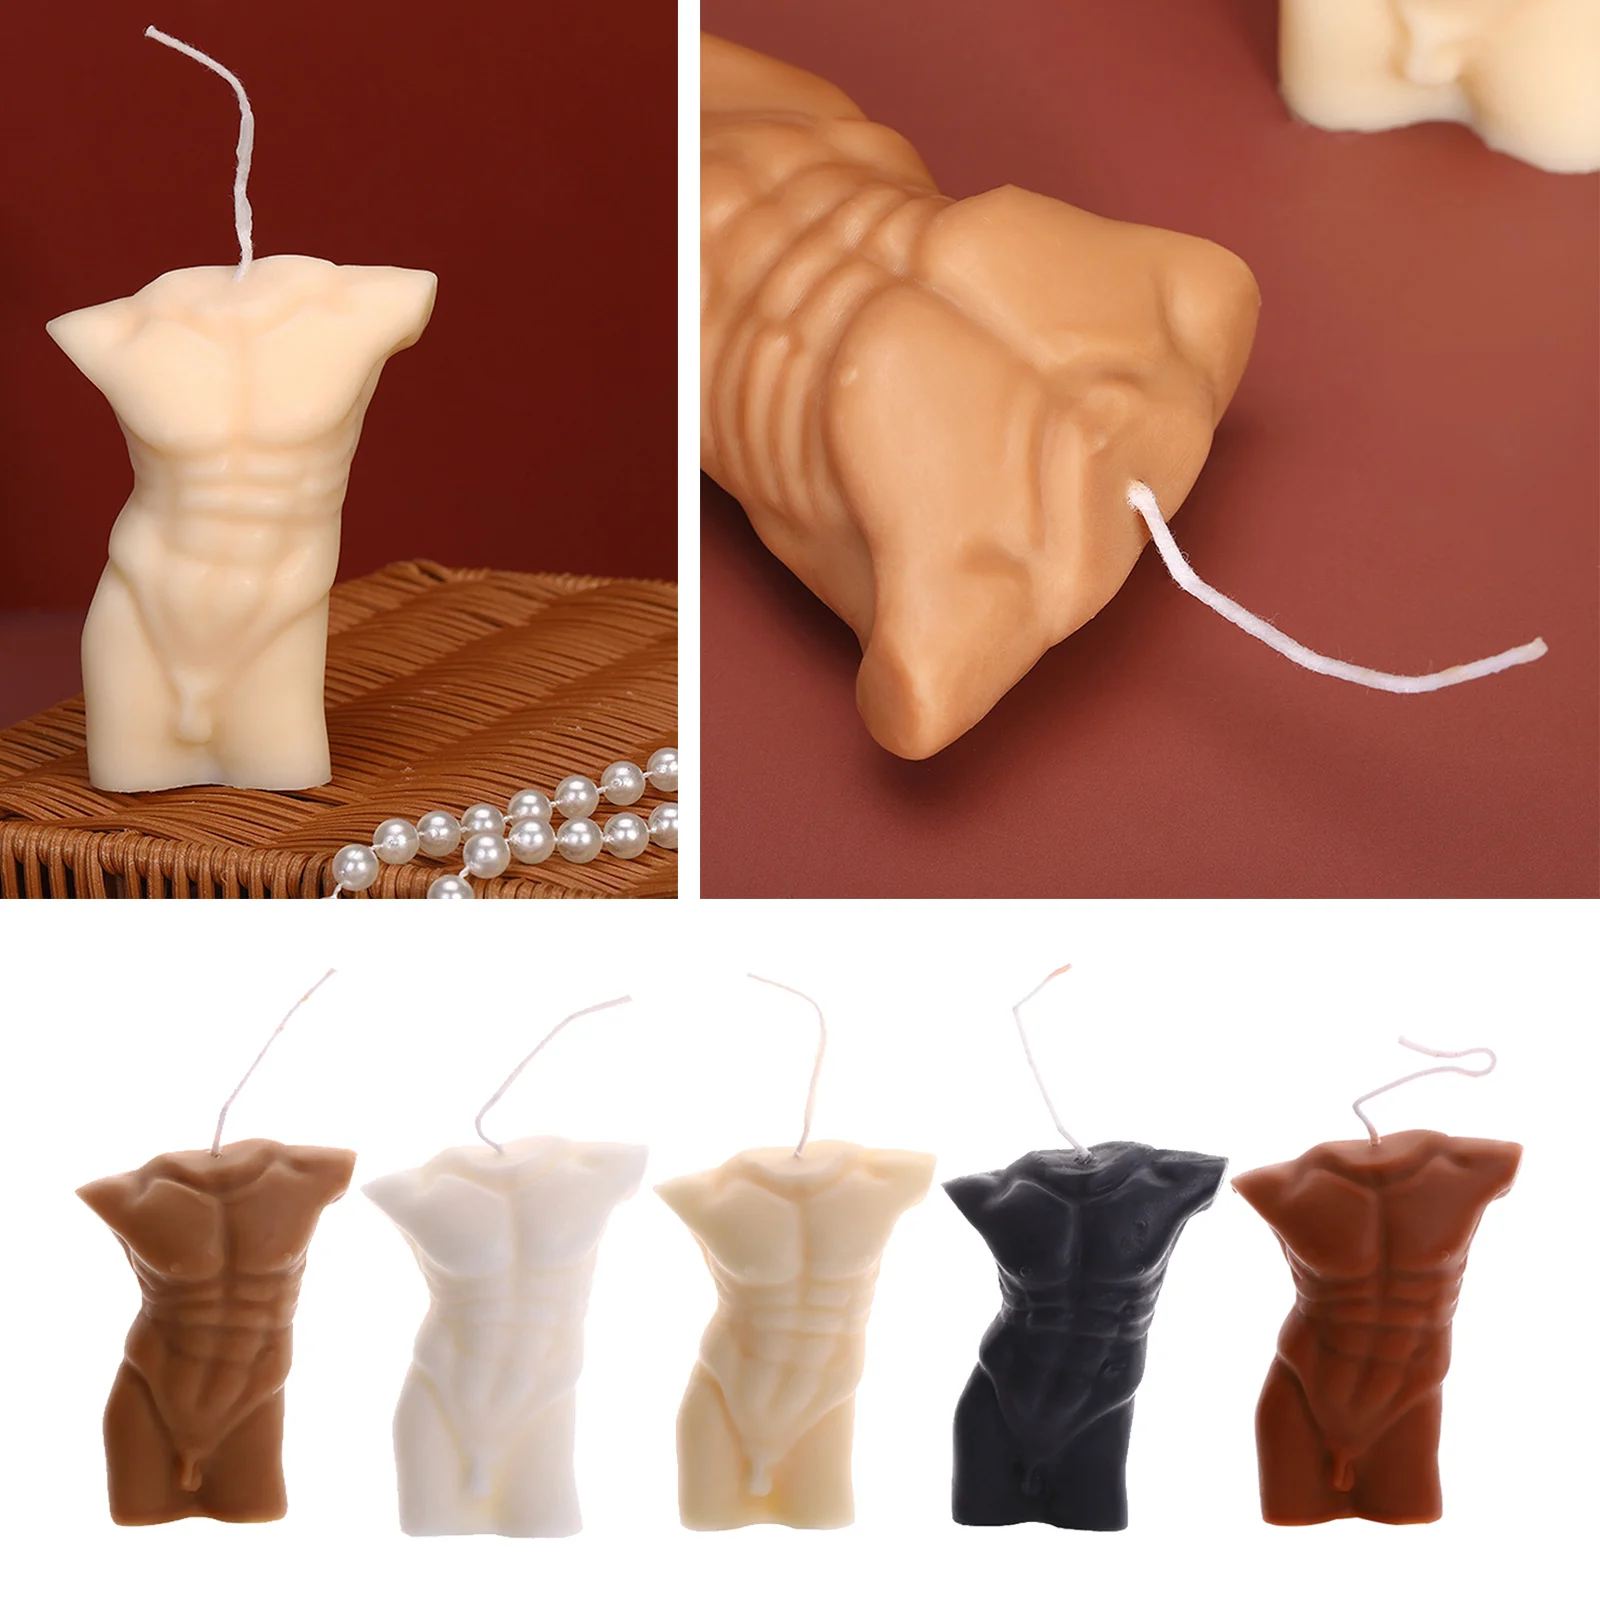 3D Male Body Soy Candle Bust Wax Candles Relaxation Fragrance Bedroom Home Wedding Party Club Photo Prop Accents